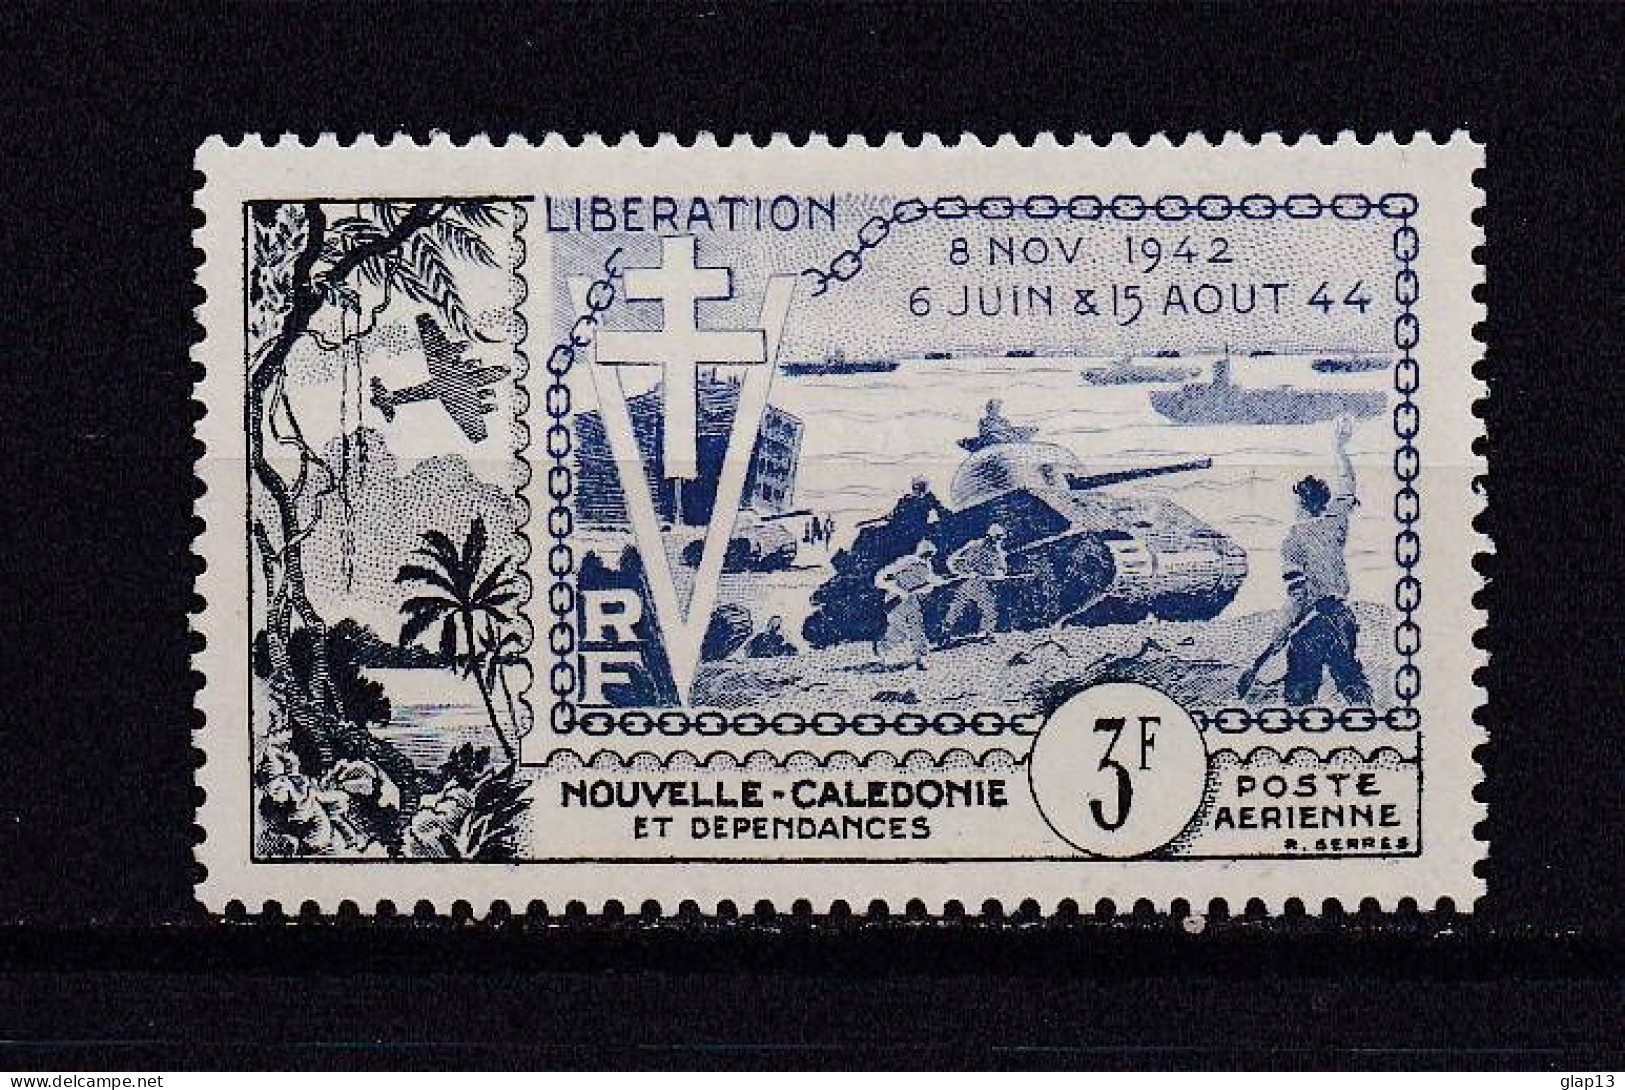 NOUVELLE-CALEDONIE 1954 PA N°65 NEUF AVEC CHARNIERE LIBERATION - Ungebraucht